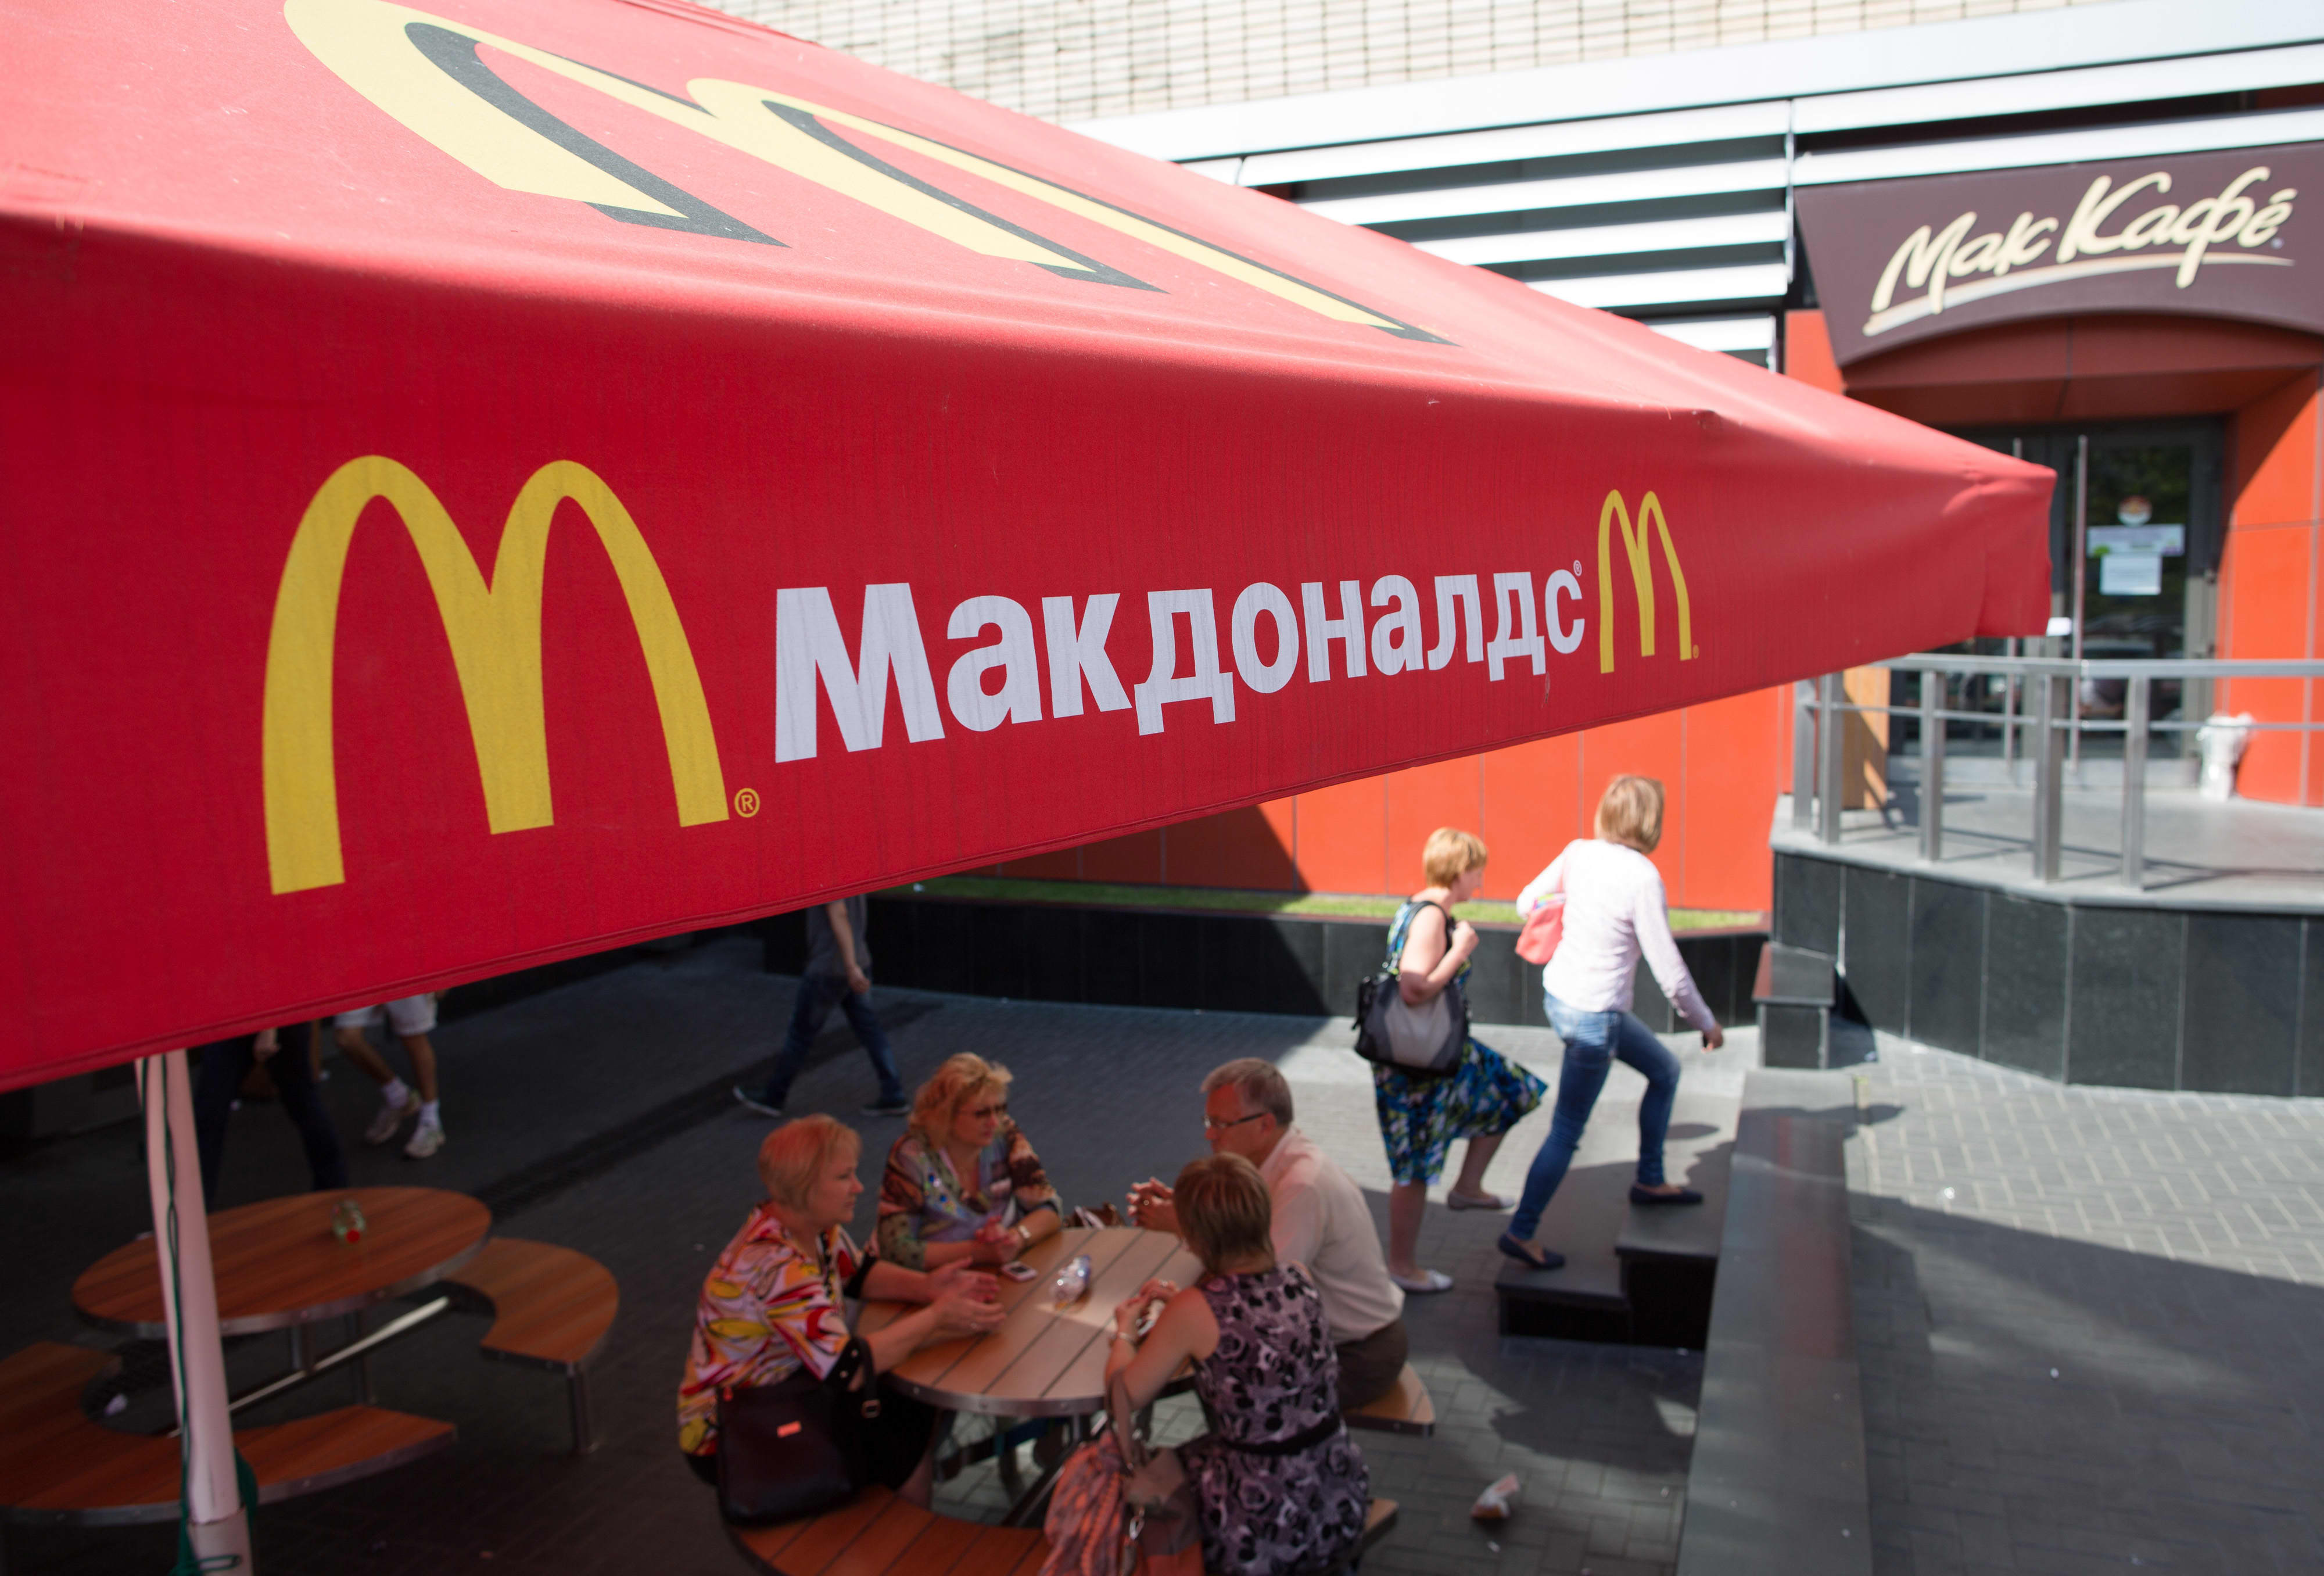 McDonald’s temporarily closes 850 restaurants in Russia nearly 2 weeks after Putin’s forces invaded Ukraine – CNBC